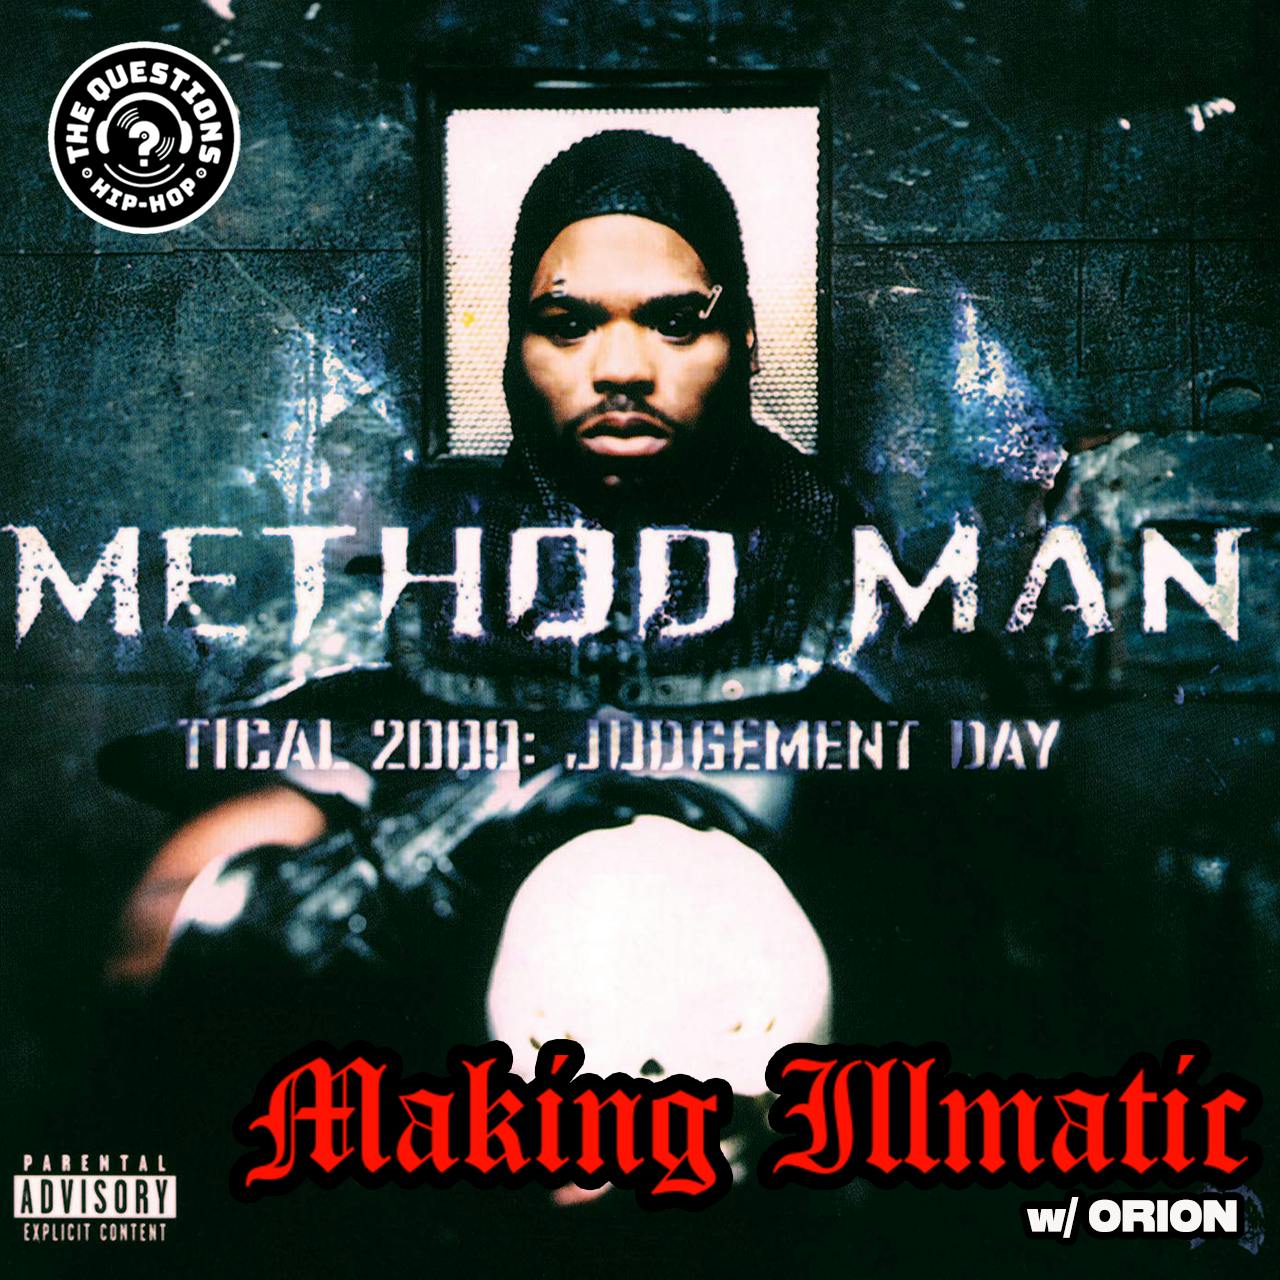 Making Illmatic: Method Man 'Tical 2000: Judgment Day' w/ Orion